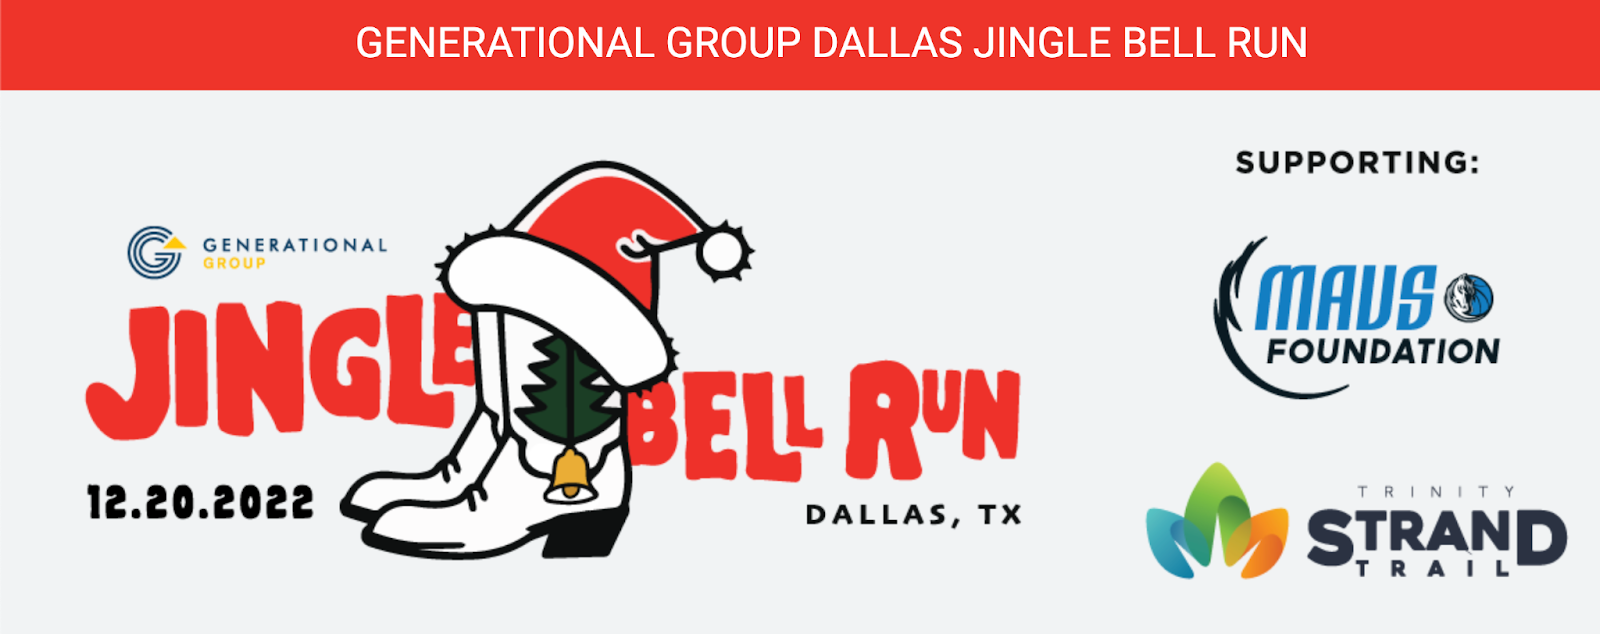 holiday fundraising ideas, the Jingle Bell run is an example of a fun run fundraiser that supports local organizations like the Mavs foundation and the Trinity Strand Trail 